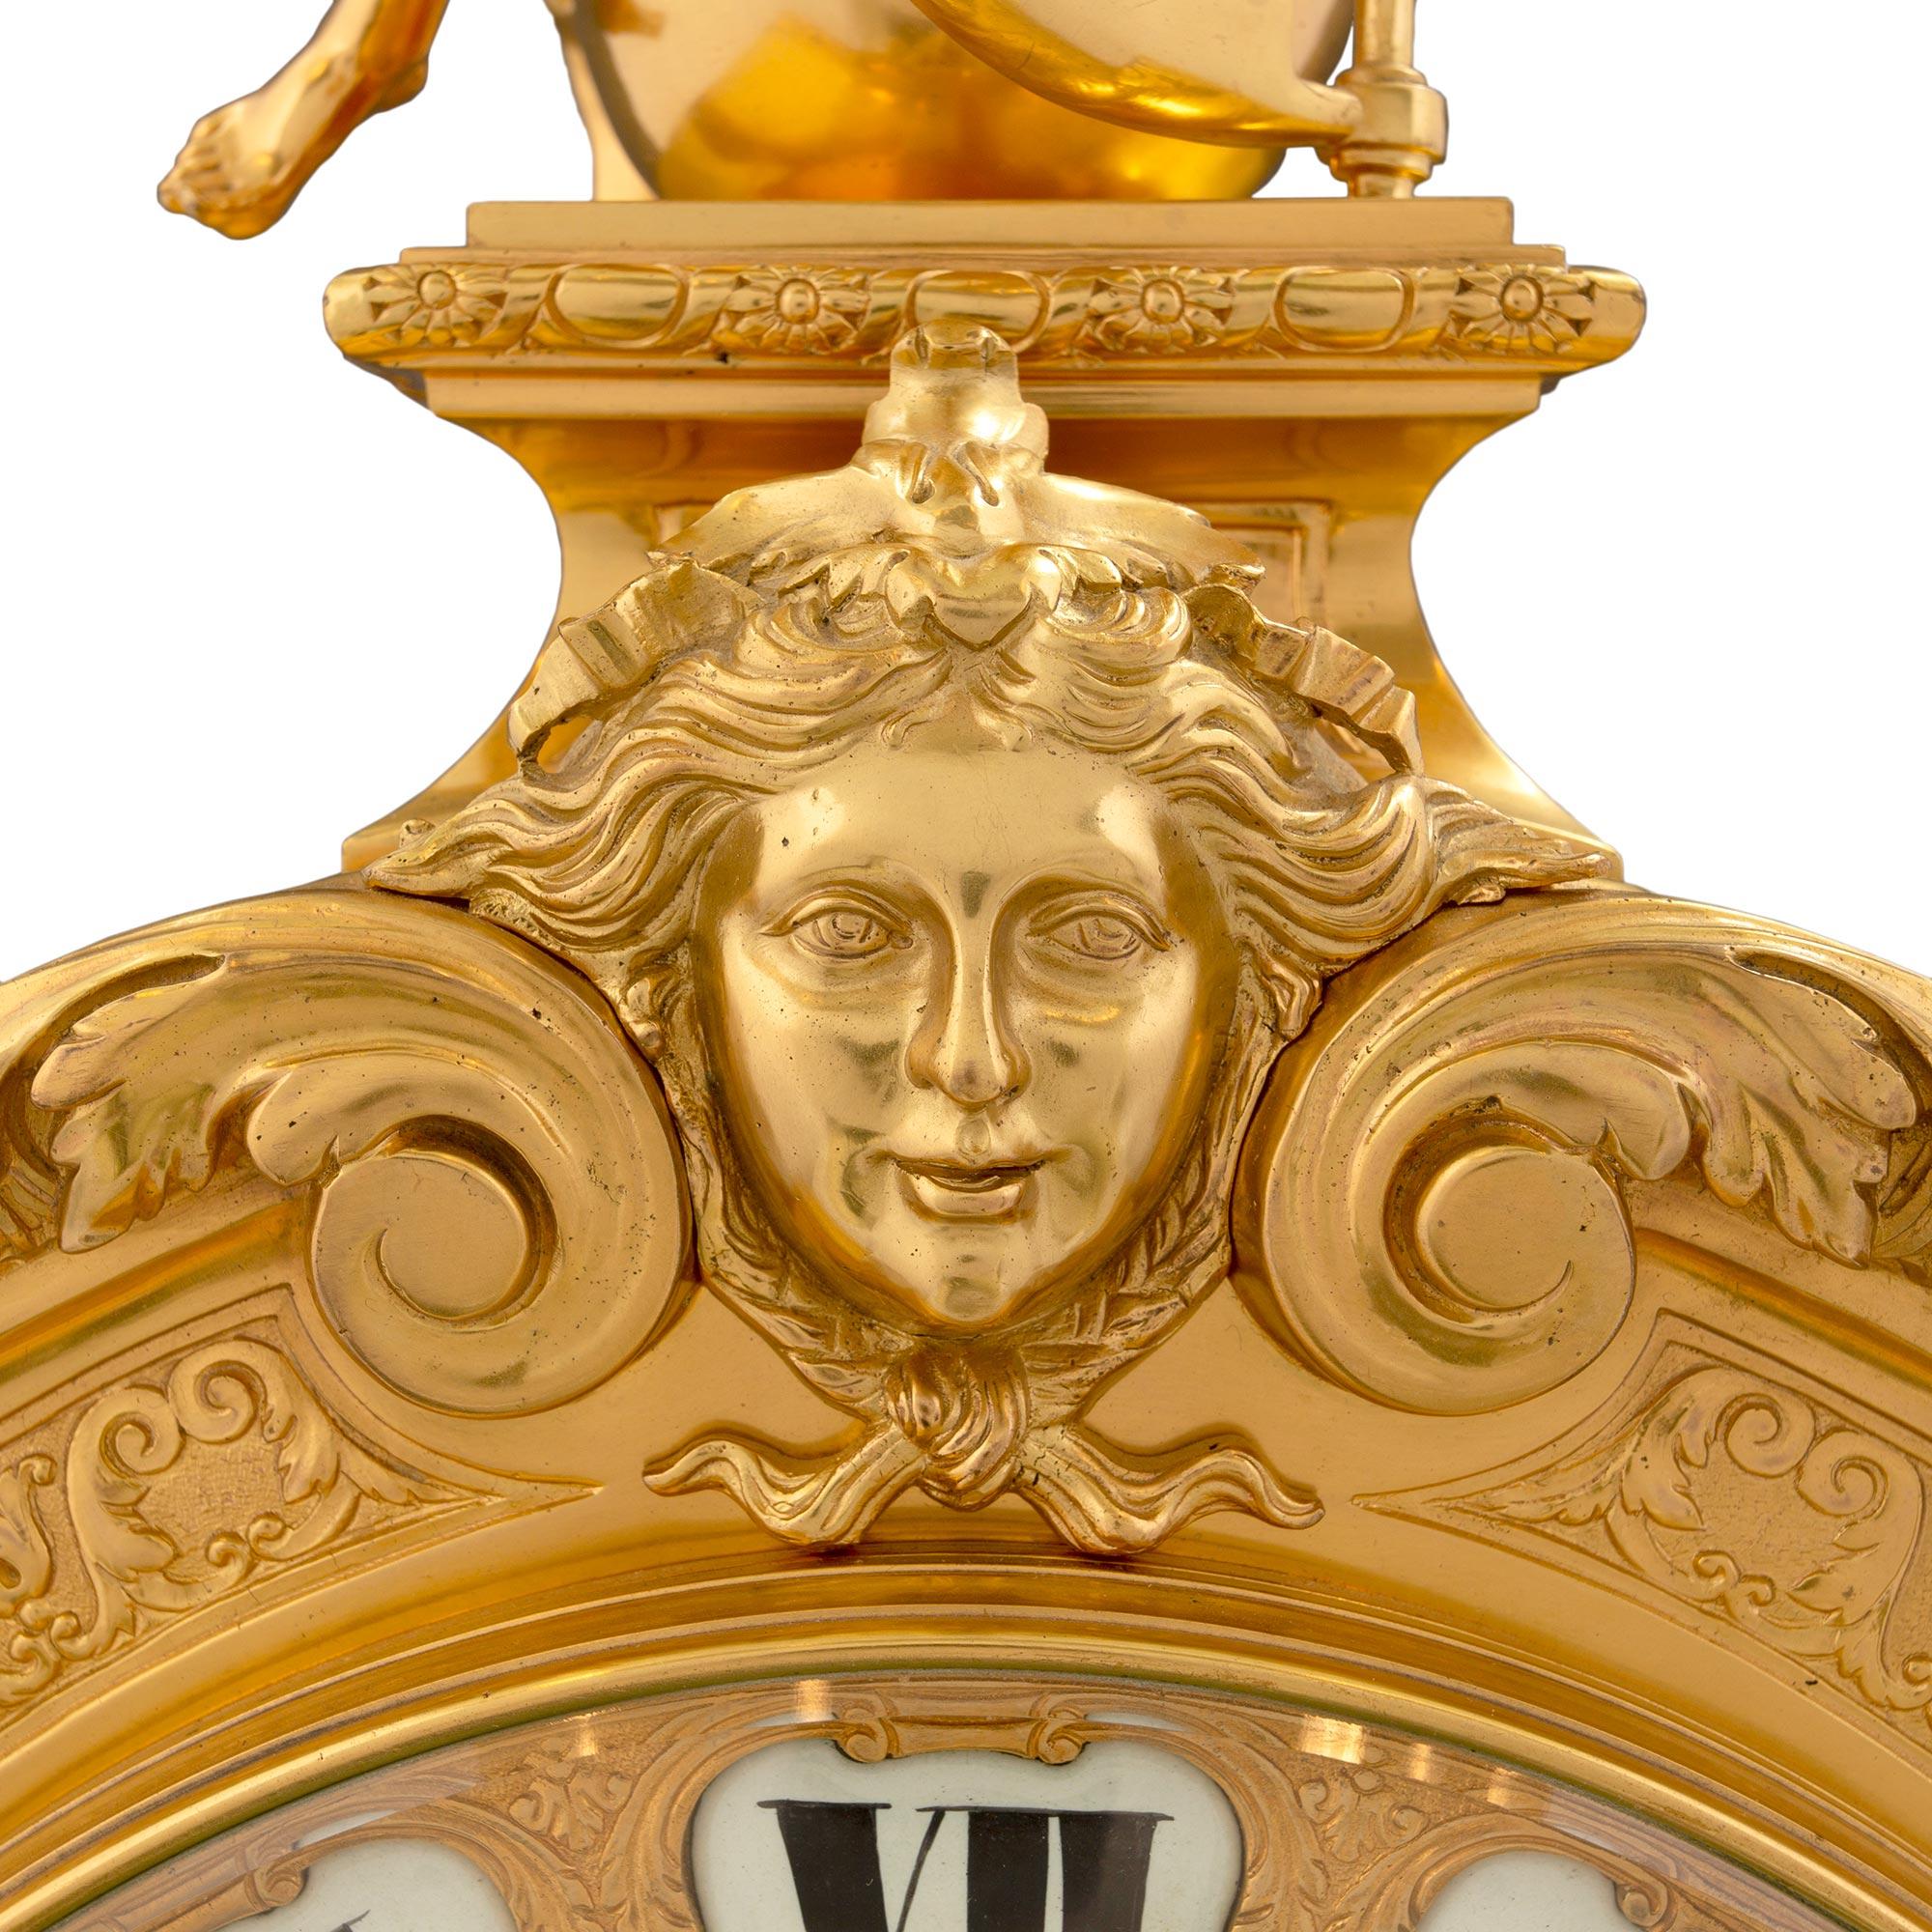 French 19th Century Louis XIV Style Ormolu Clock Stamped ‘DENIERE A PARIS” For Sale 6